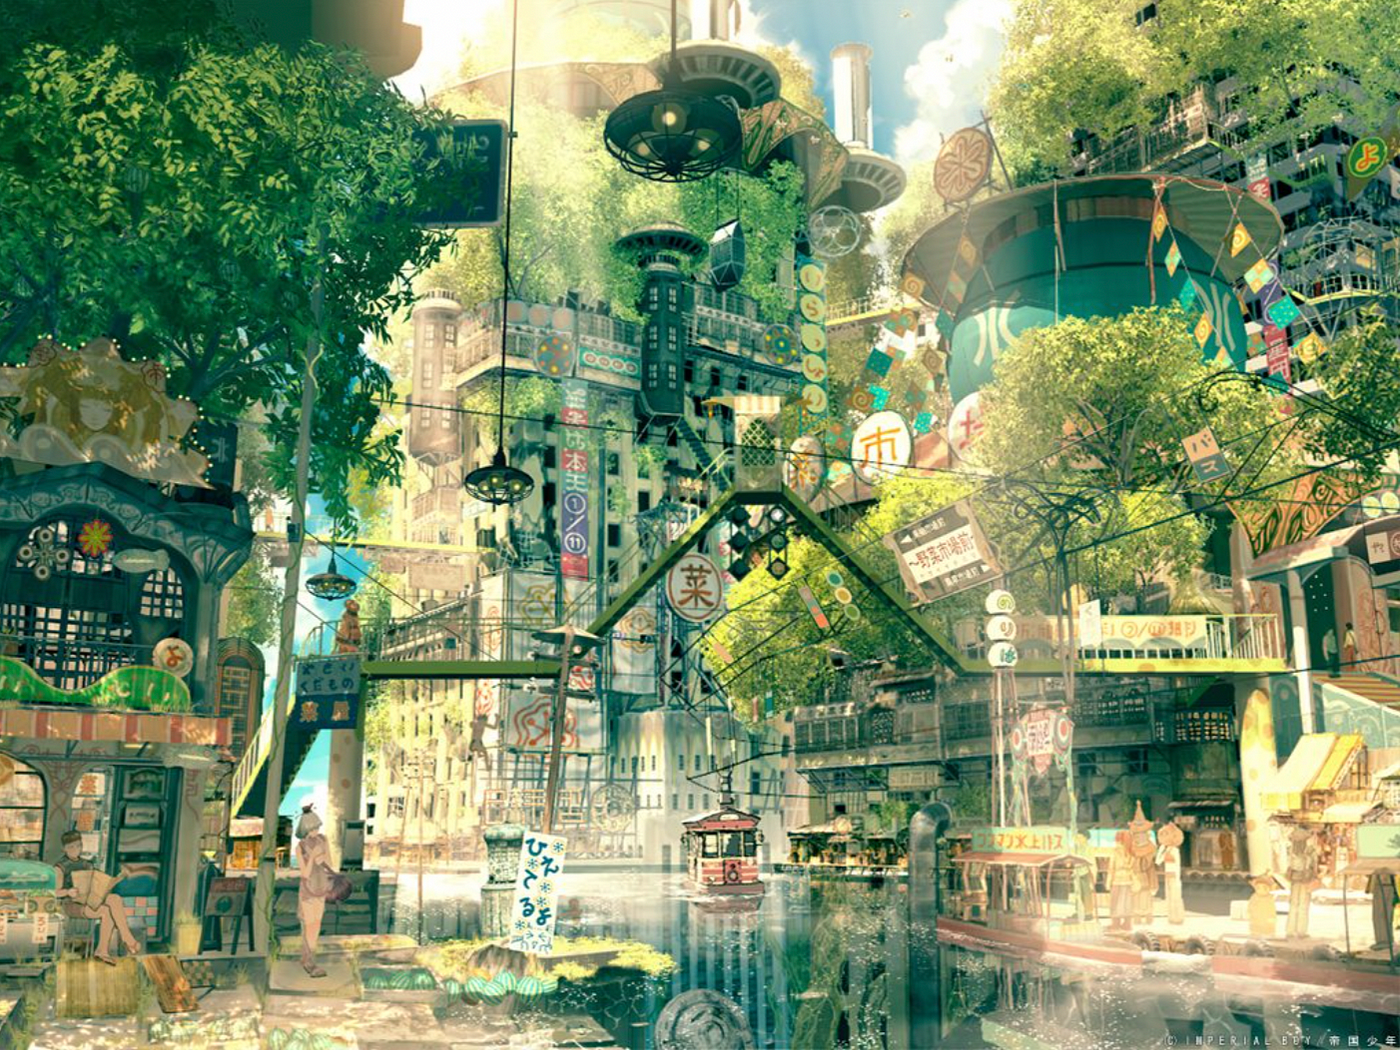 Solarpunk — A Story Of The Tomorrow We Want To Live In, by Matterless